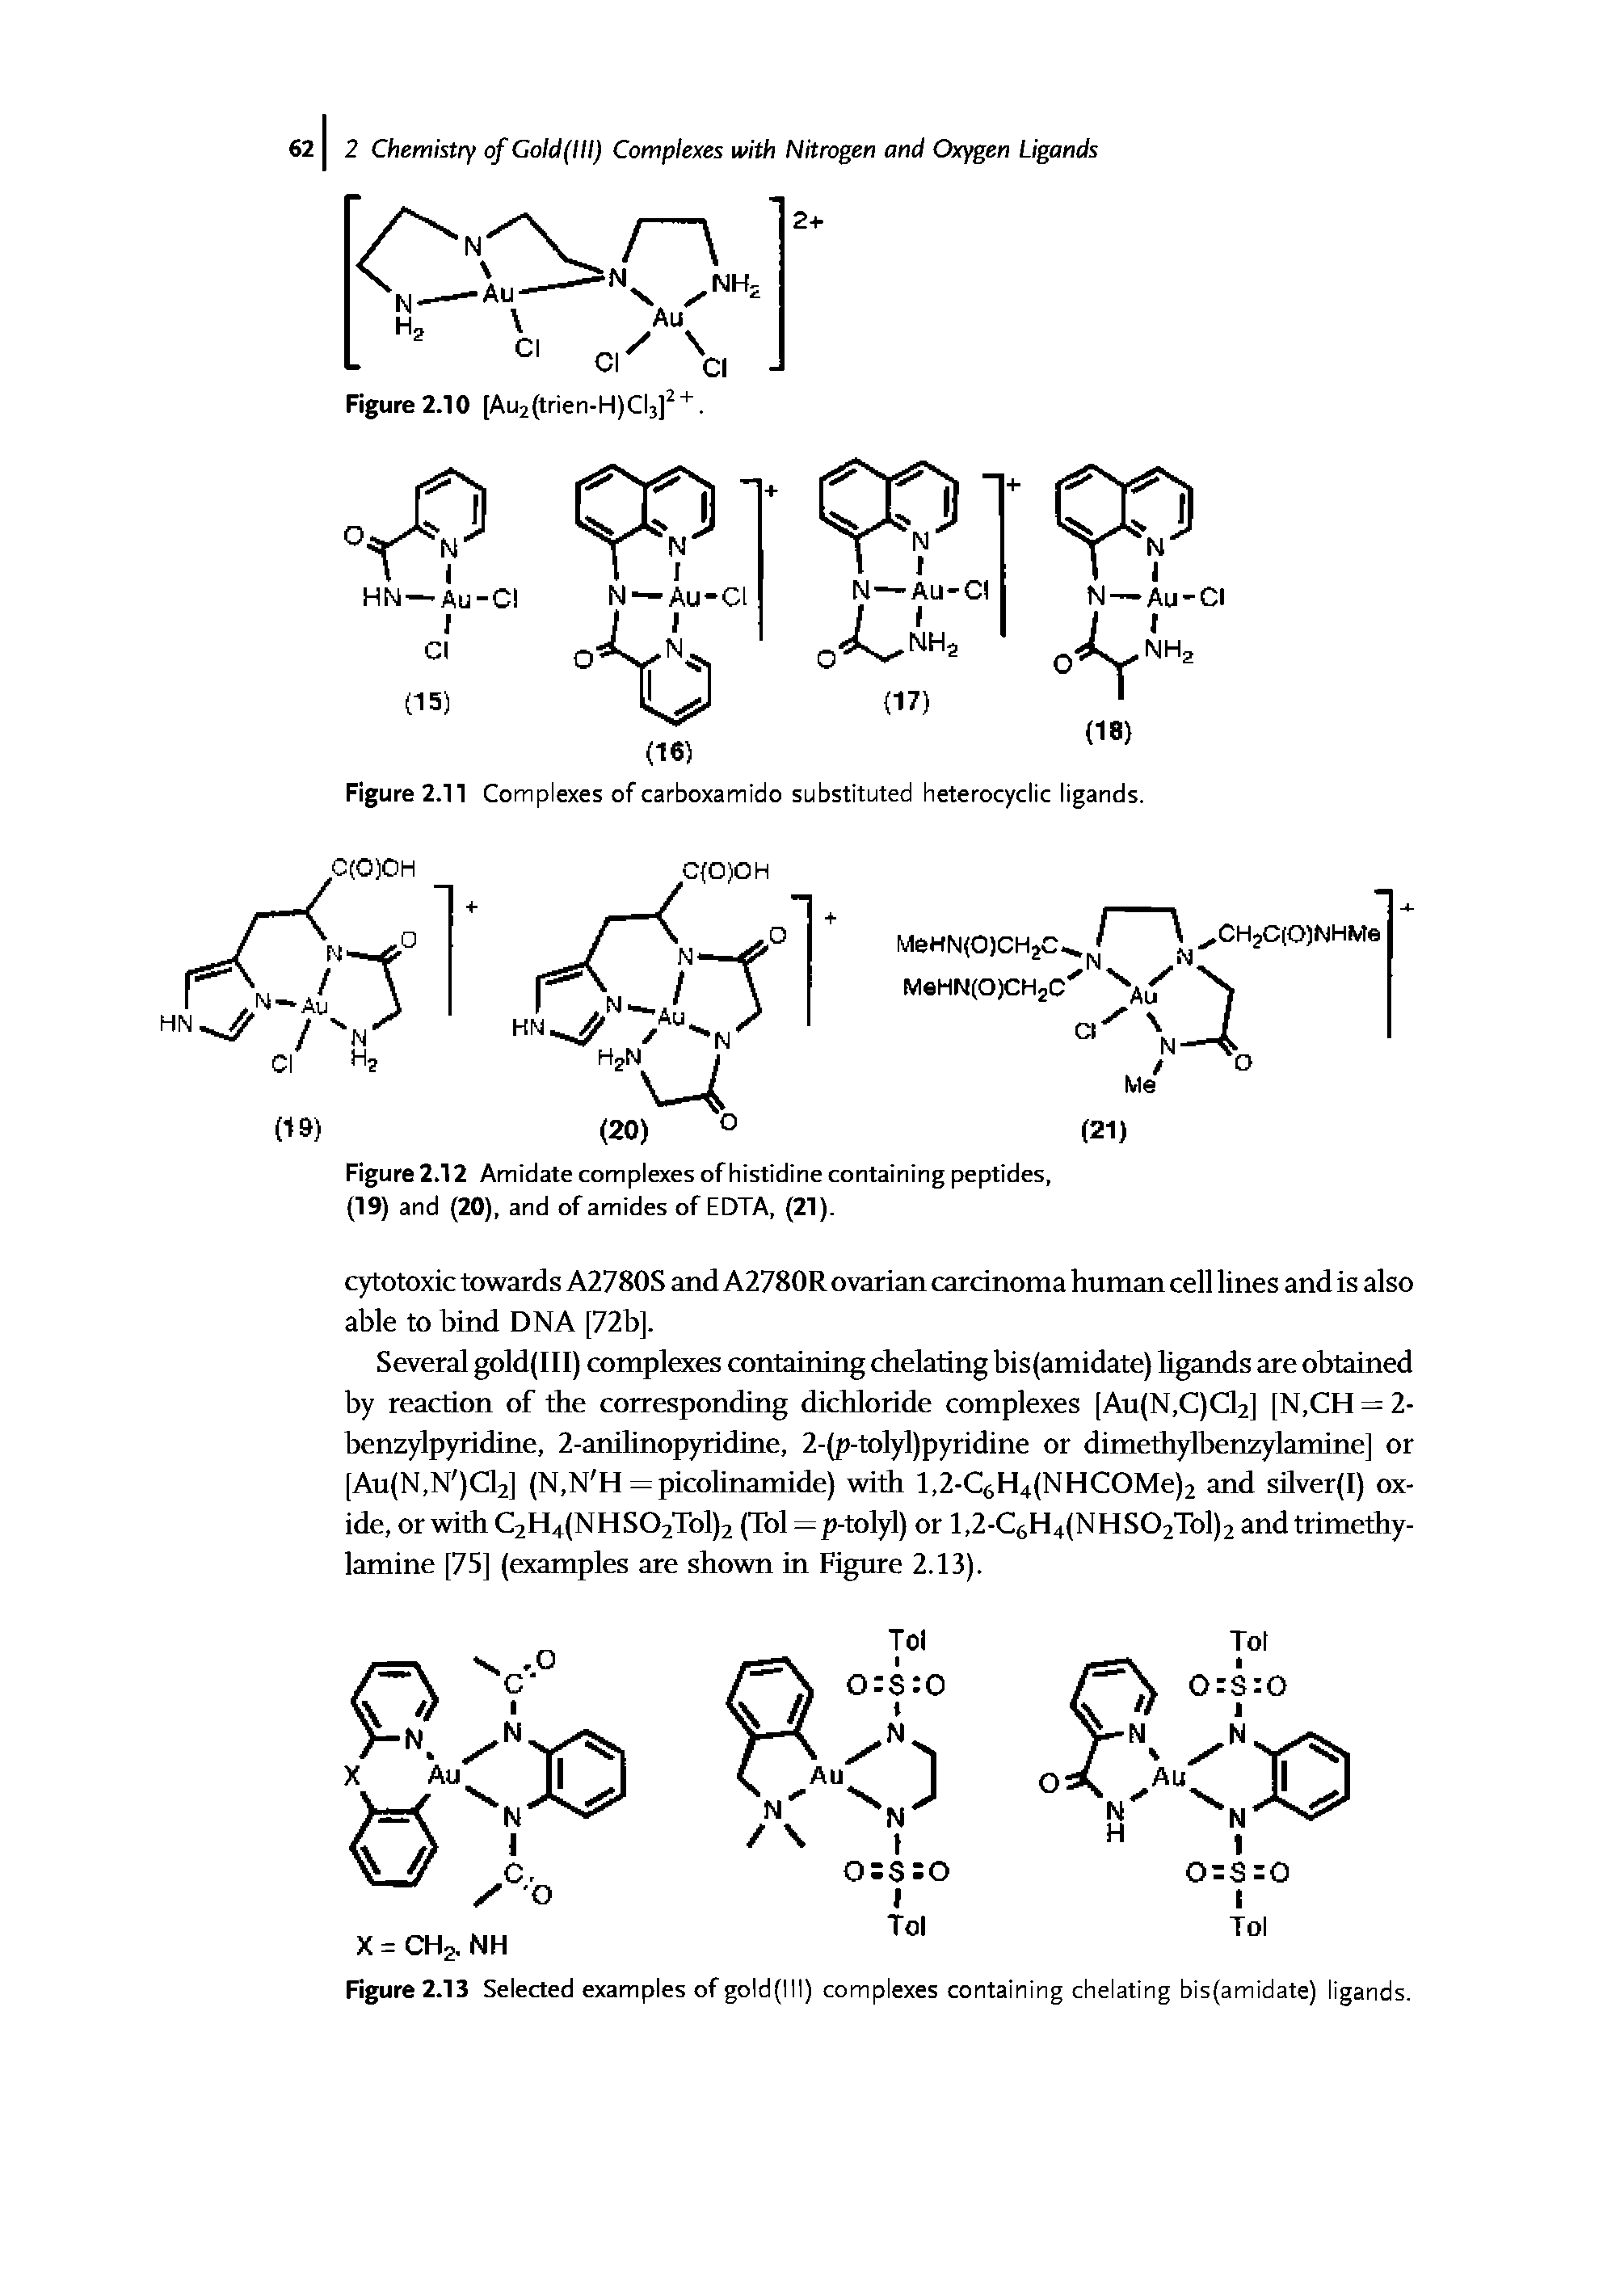 Figure 2.13 Selected examples of gold(lll) complexes containing chelating bis(amidate) ligands.